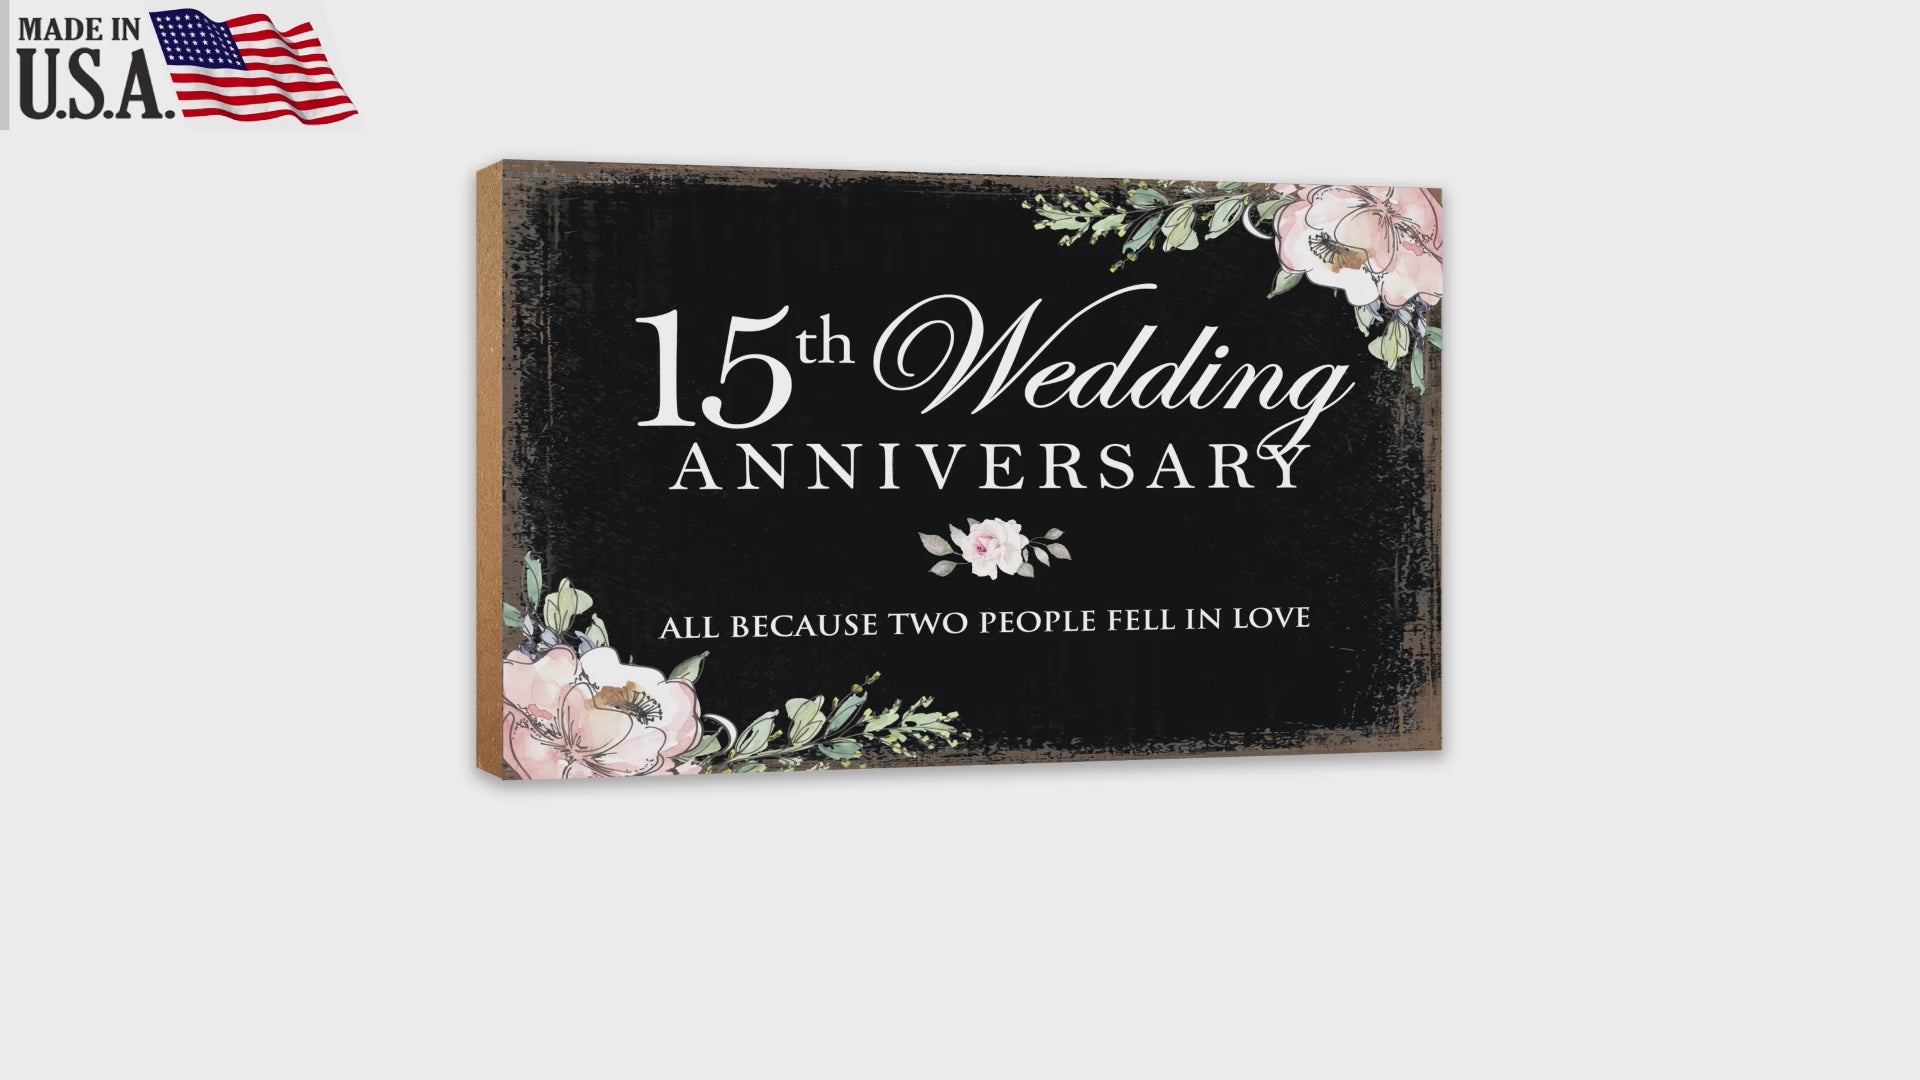 15th Wedding Anniversary Unique Shelf Decor and Tabletop Signs Gift for Couples - Fell in Love